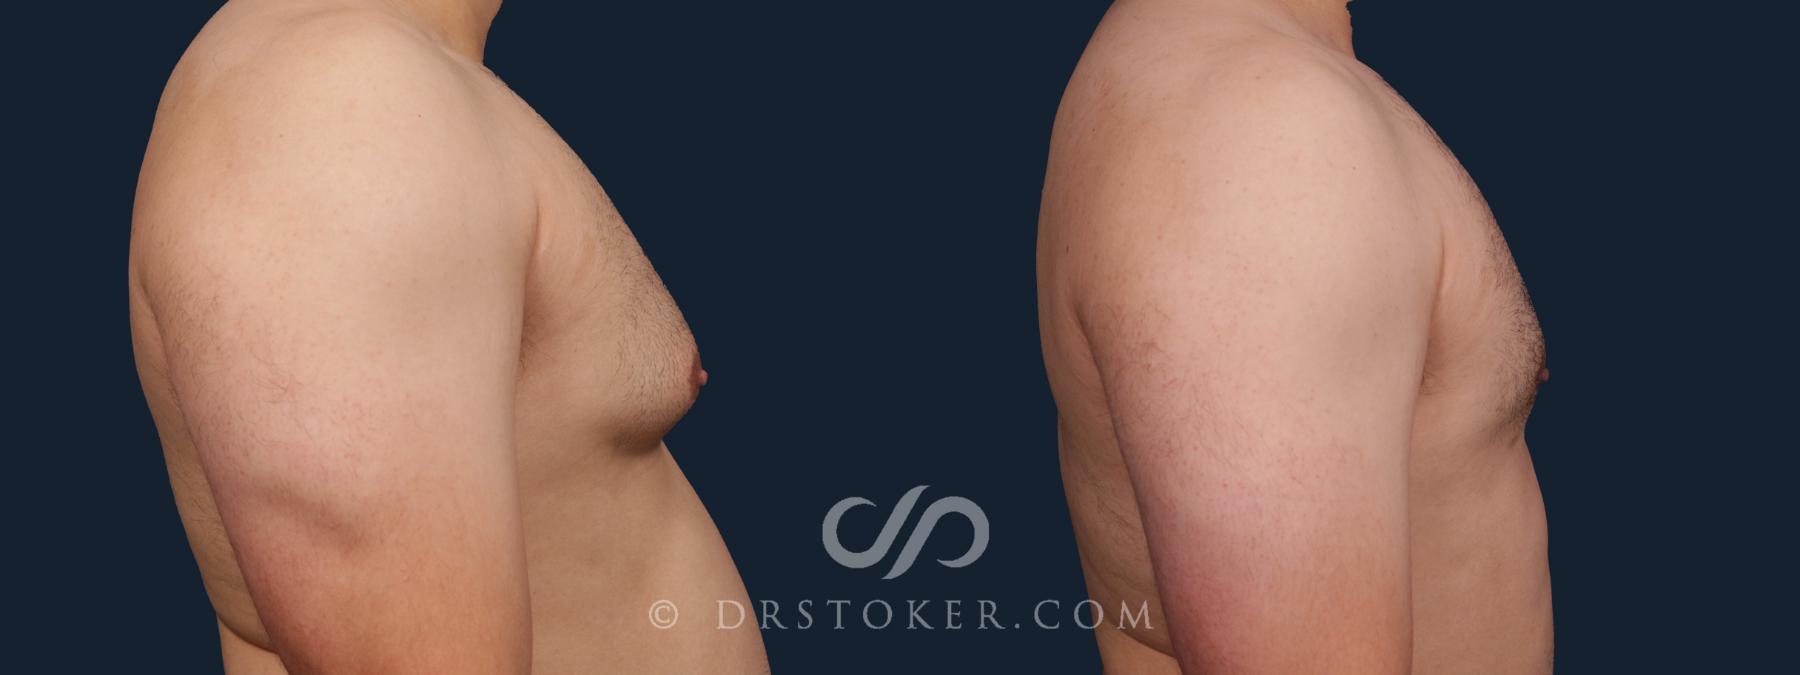 Before & After Breast Reduction for Men (Gynecomastia) Case 2177 Right Side View in Los Angeles, CA